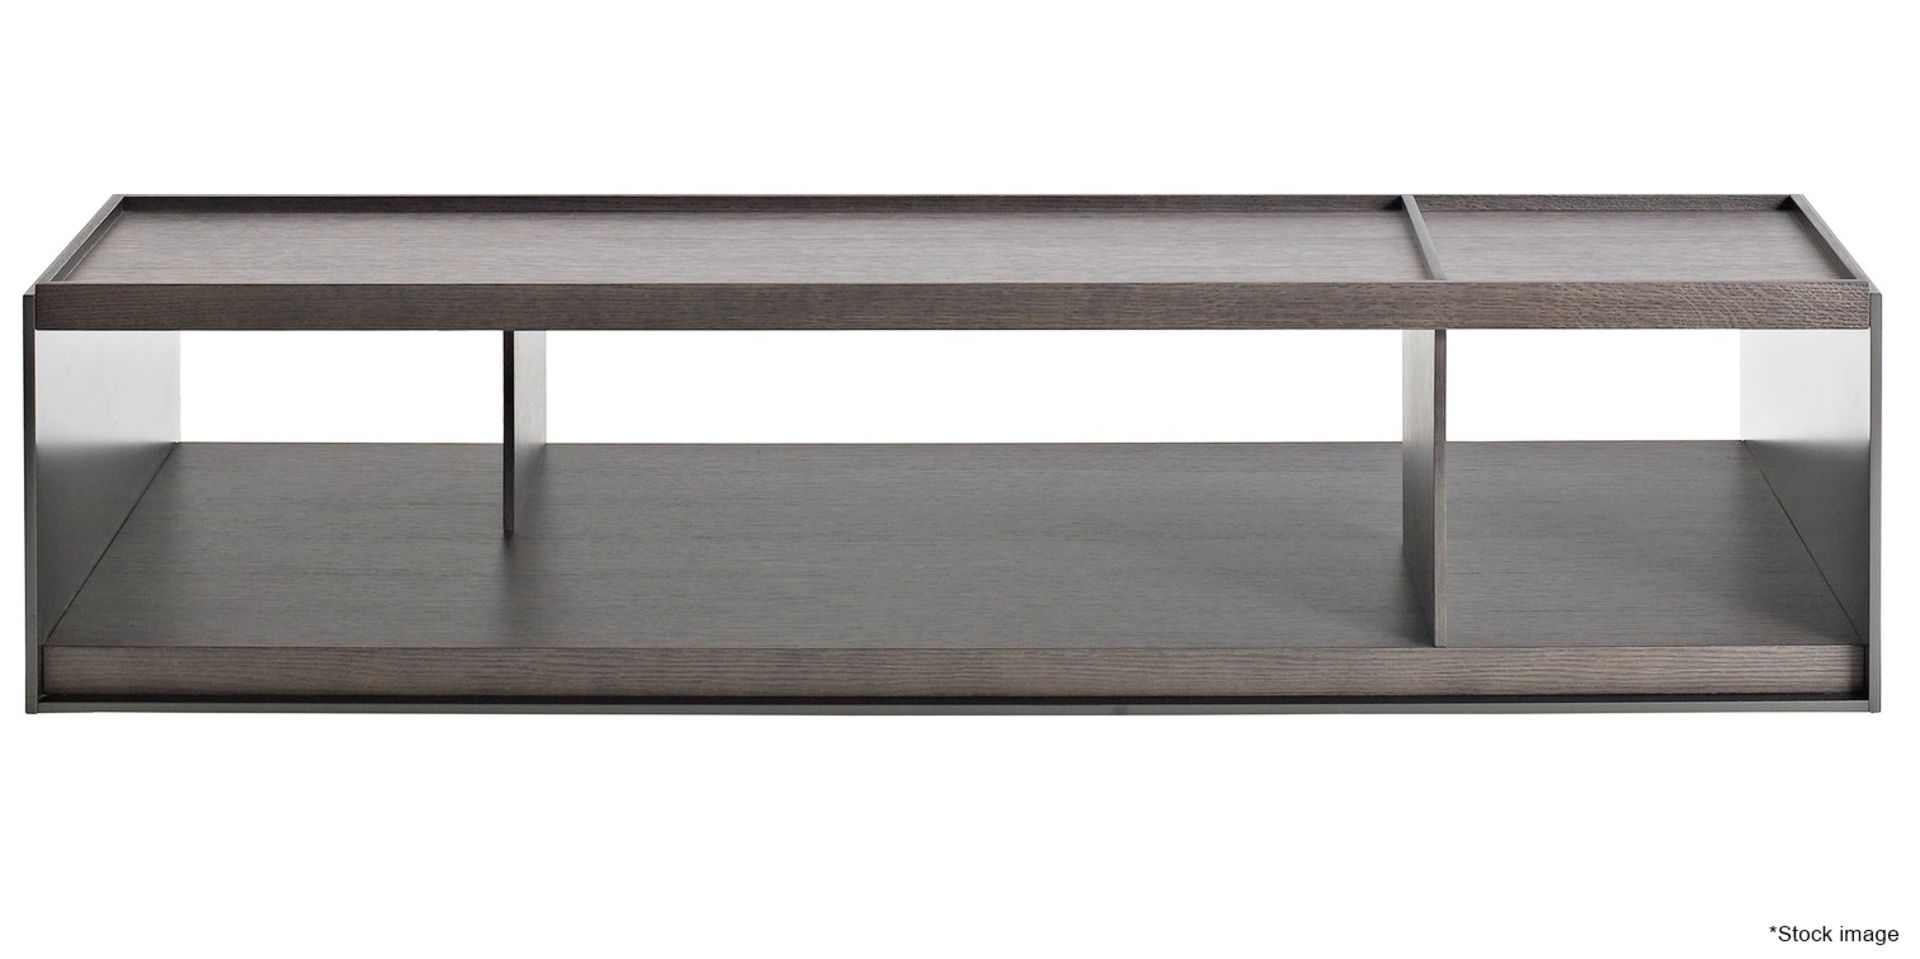 1 x B&B ITALIA Surface Coffee Table (Parts Only) - Ref: 5881428/HJL646/11-23 - CL087 - Location: